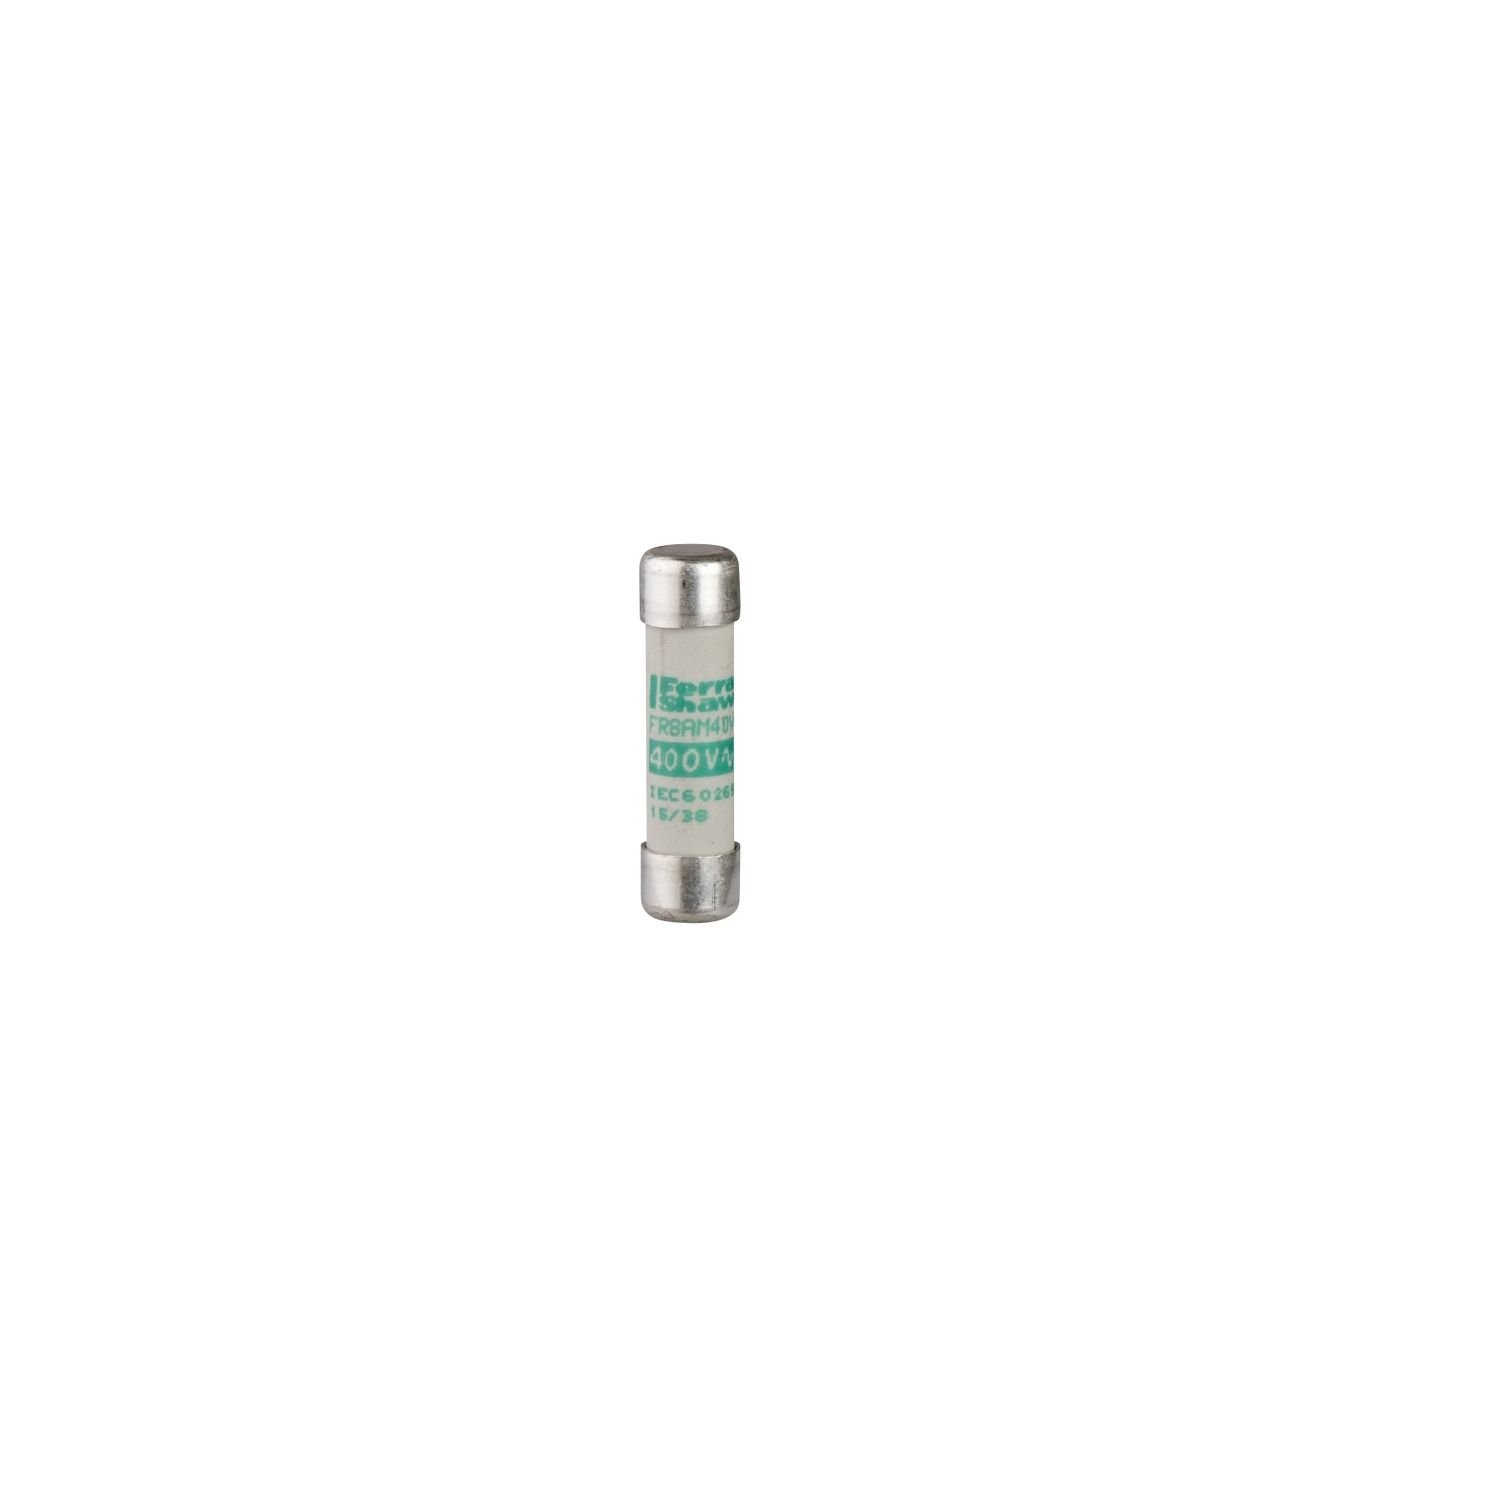 DF2CA06 NFC cartridge fuses, TeSys GS, cylindrical 10mm x 38mm, fuse type aM, 500VAC, 6A, without striker